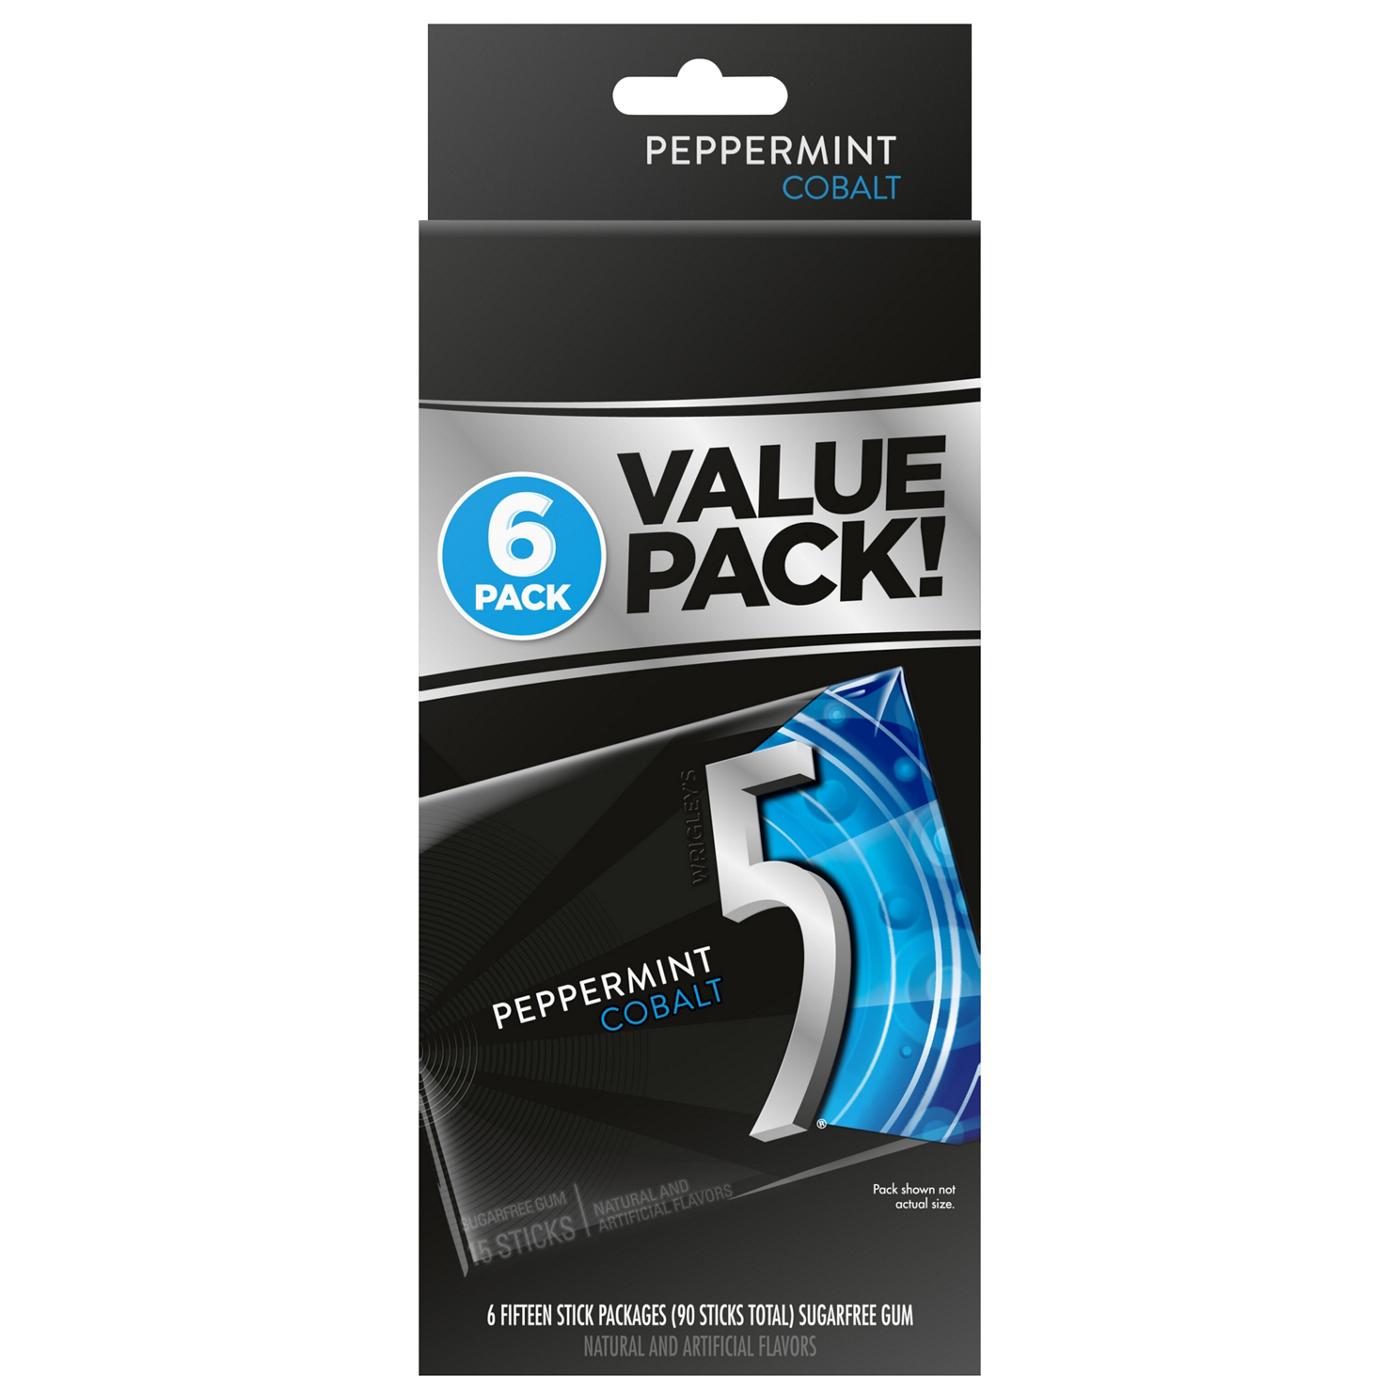 Wrigley's 5 Sugarfree Chewing Gum Value Pack - Peppermint Cobalt, 6 Pk; image 1 of 7